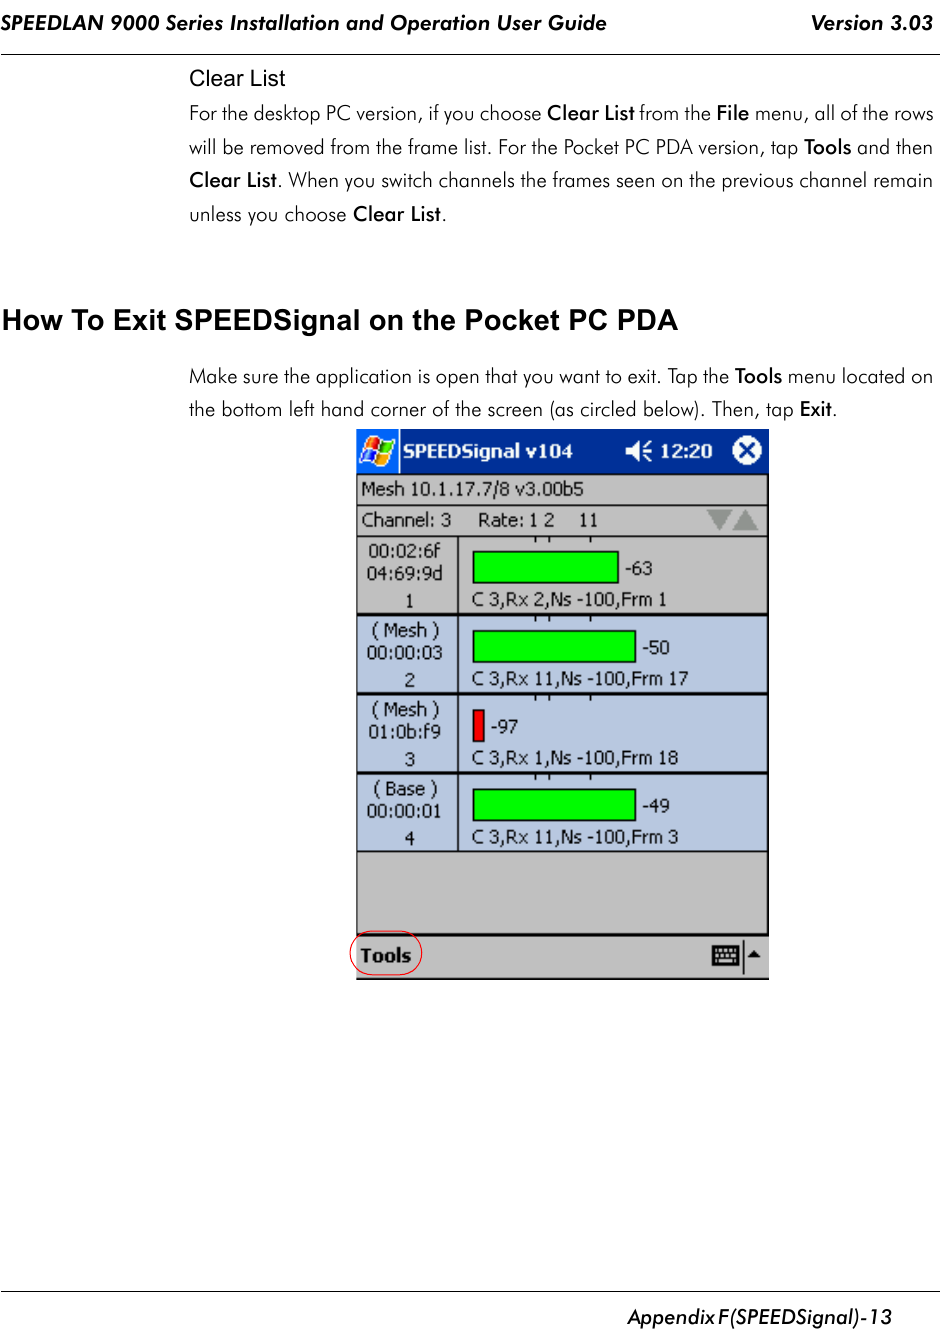 SPEEDLAN 9000 Series Installation and Operation User Guide                                 Version 3.03      Appendix       F (SPEEDSignal)-13                                                                                                                                                              Clear ListFor the desktop PC version, if you choose Clear List from the File menu, all of the rows will be removed from the frame list. For the Pocket PC PDA version, tap Tools and then Clear List. When you switch channels the frames seen on the previous channel remain unless you choose Clear List. How To Exit SPEEDSignal on the Pocket PC PDAMake sure the application is open that you want to exit. Tap the Tools menu located on the bottom left hand corner of the screen (as circled below). Then, tap Exit.